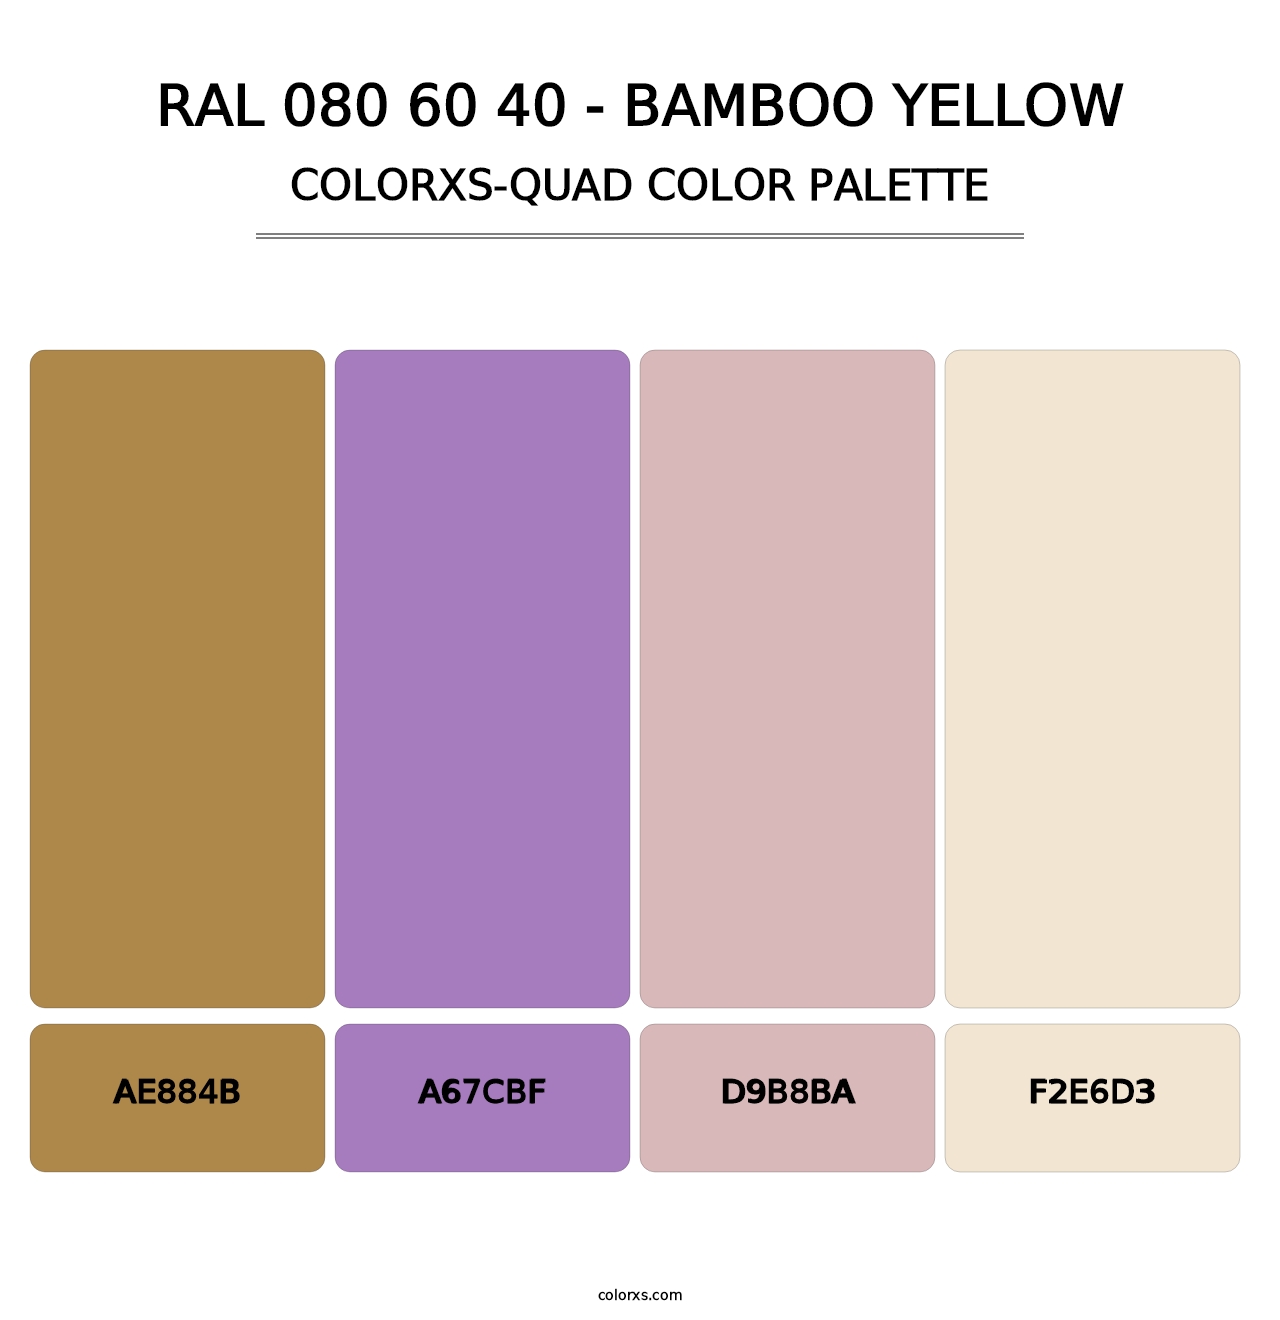 RAL 080 60 40 - Bamboo Yellow - Colorxs Quad Palette